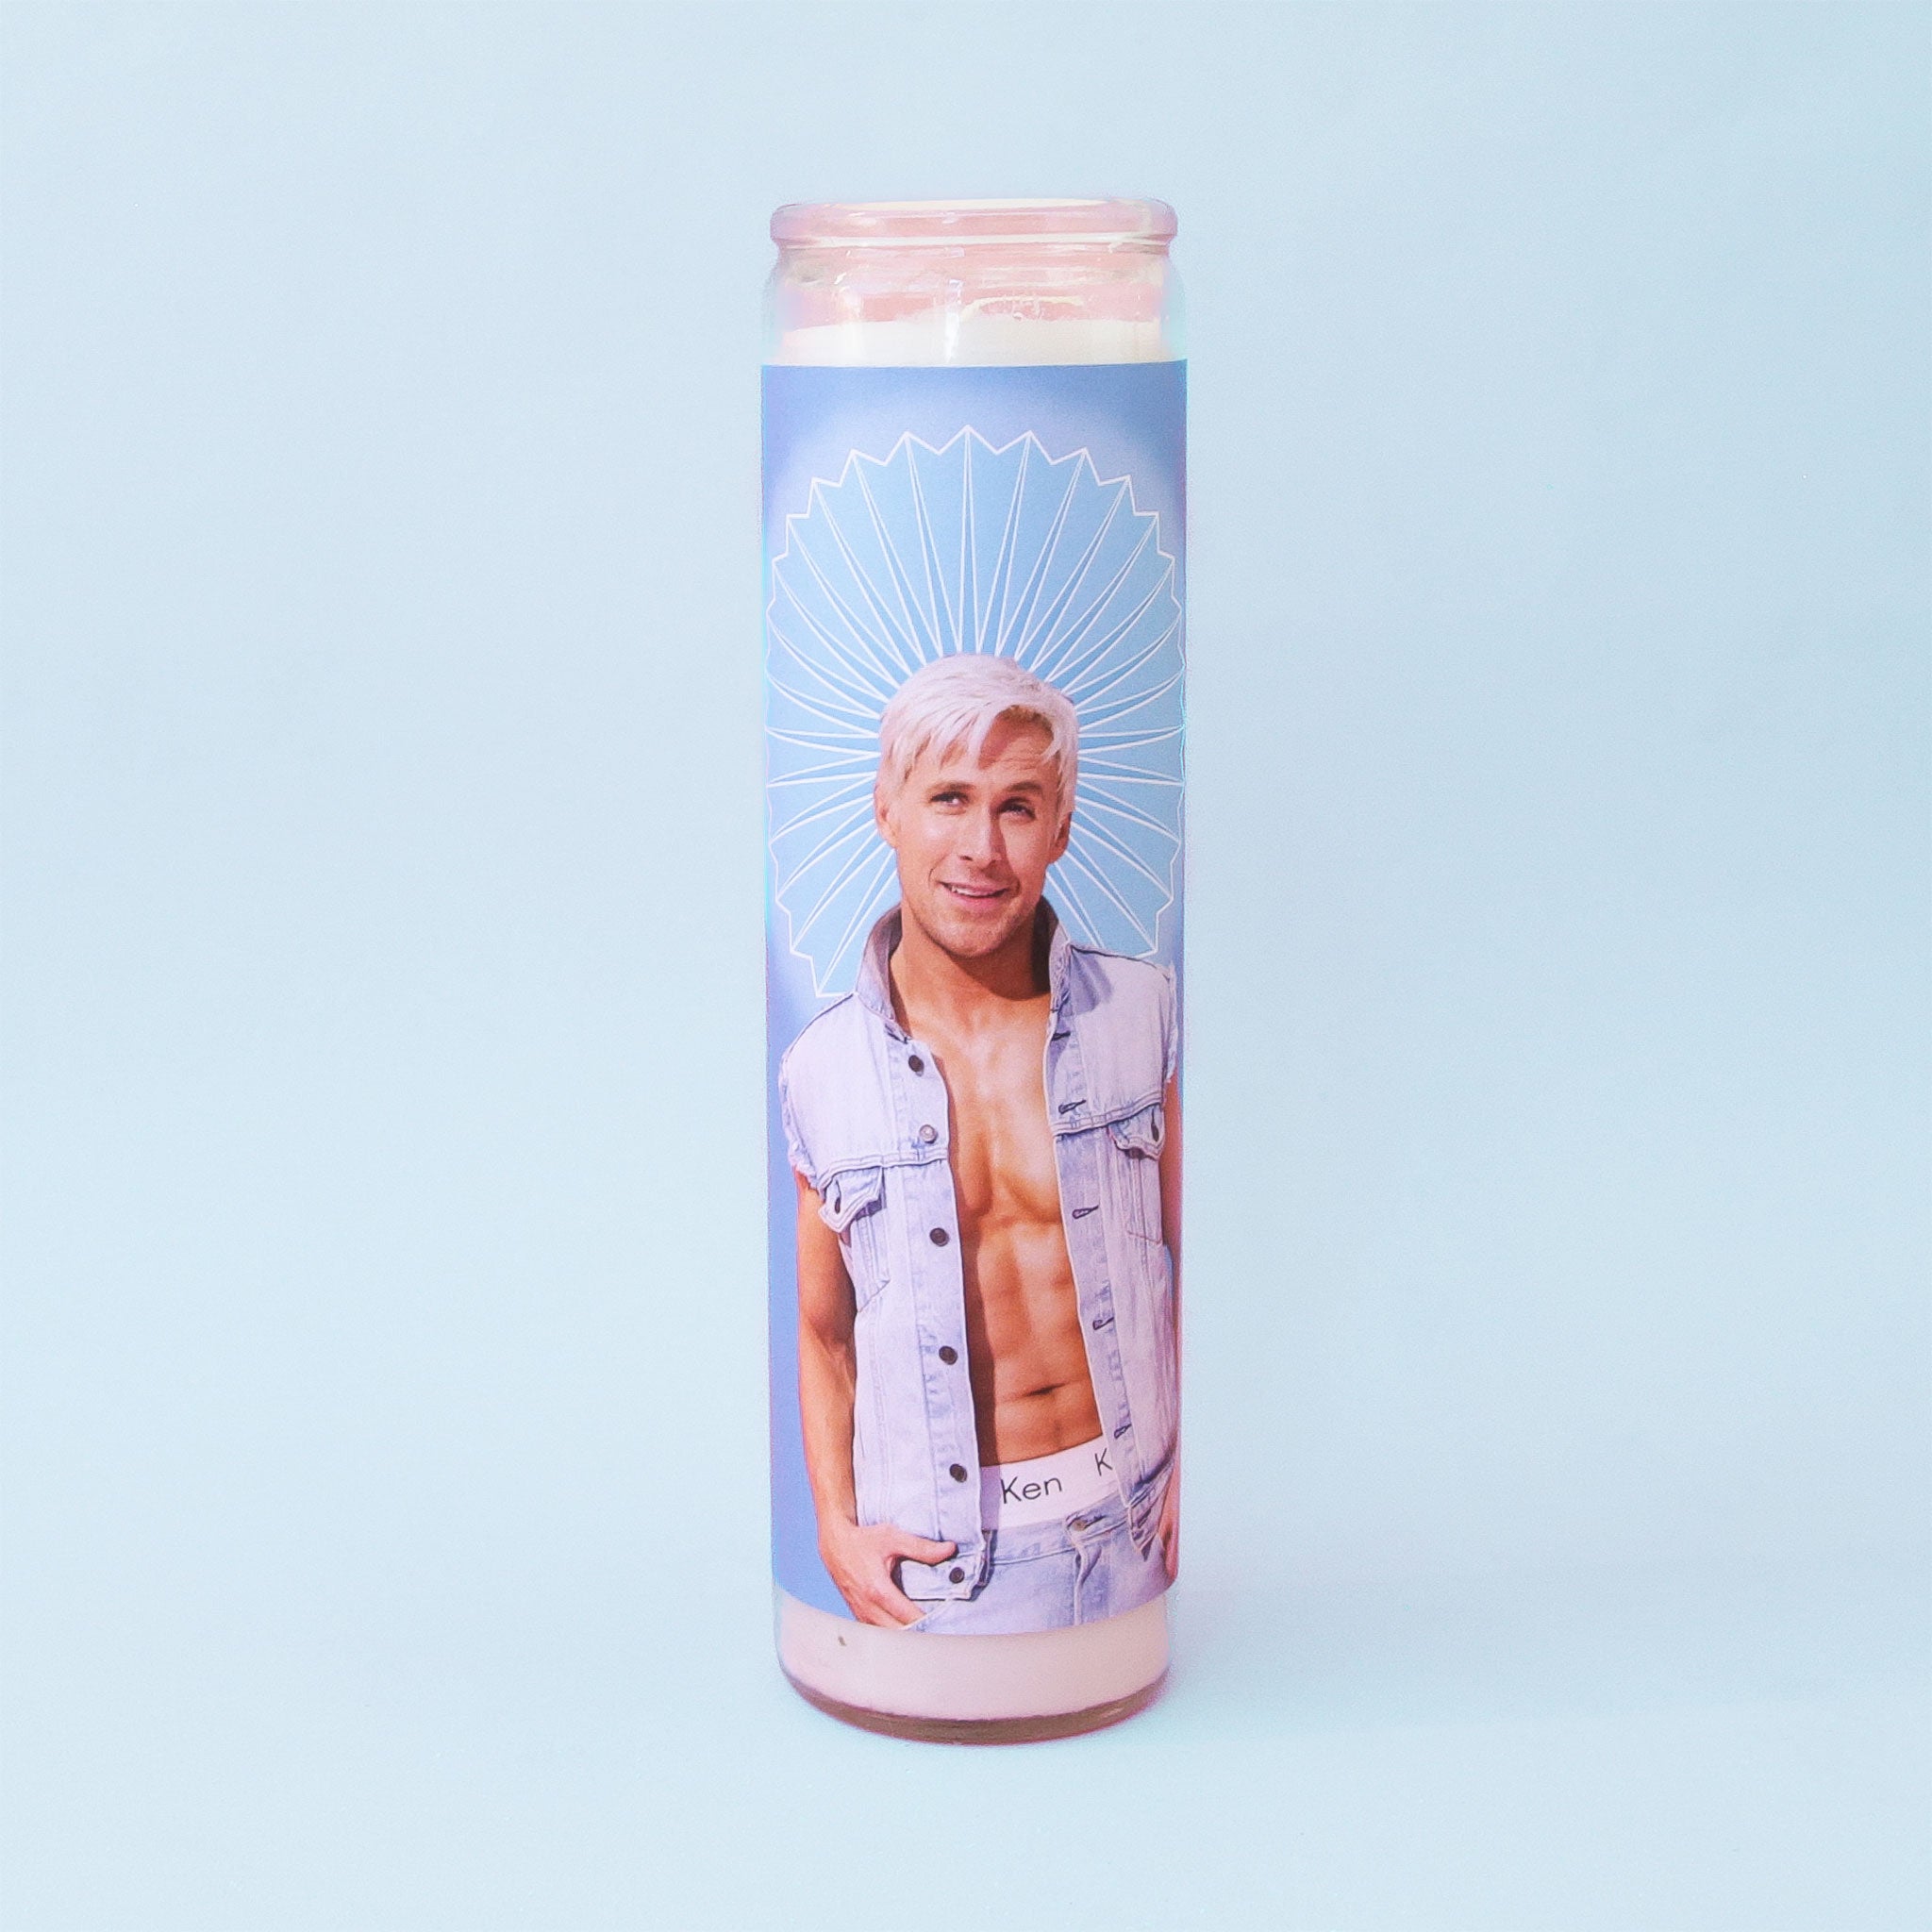 On a blue background is a blue prayer candle with a photo of Ken played by the actor Ryan Gosling.